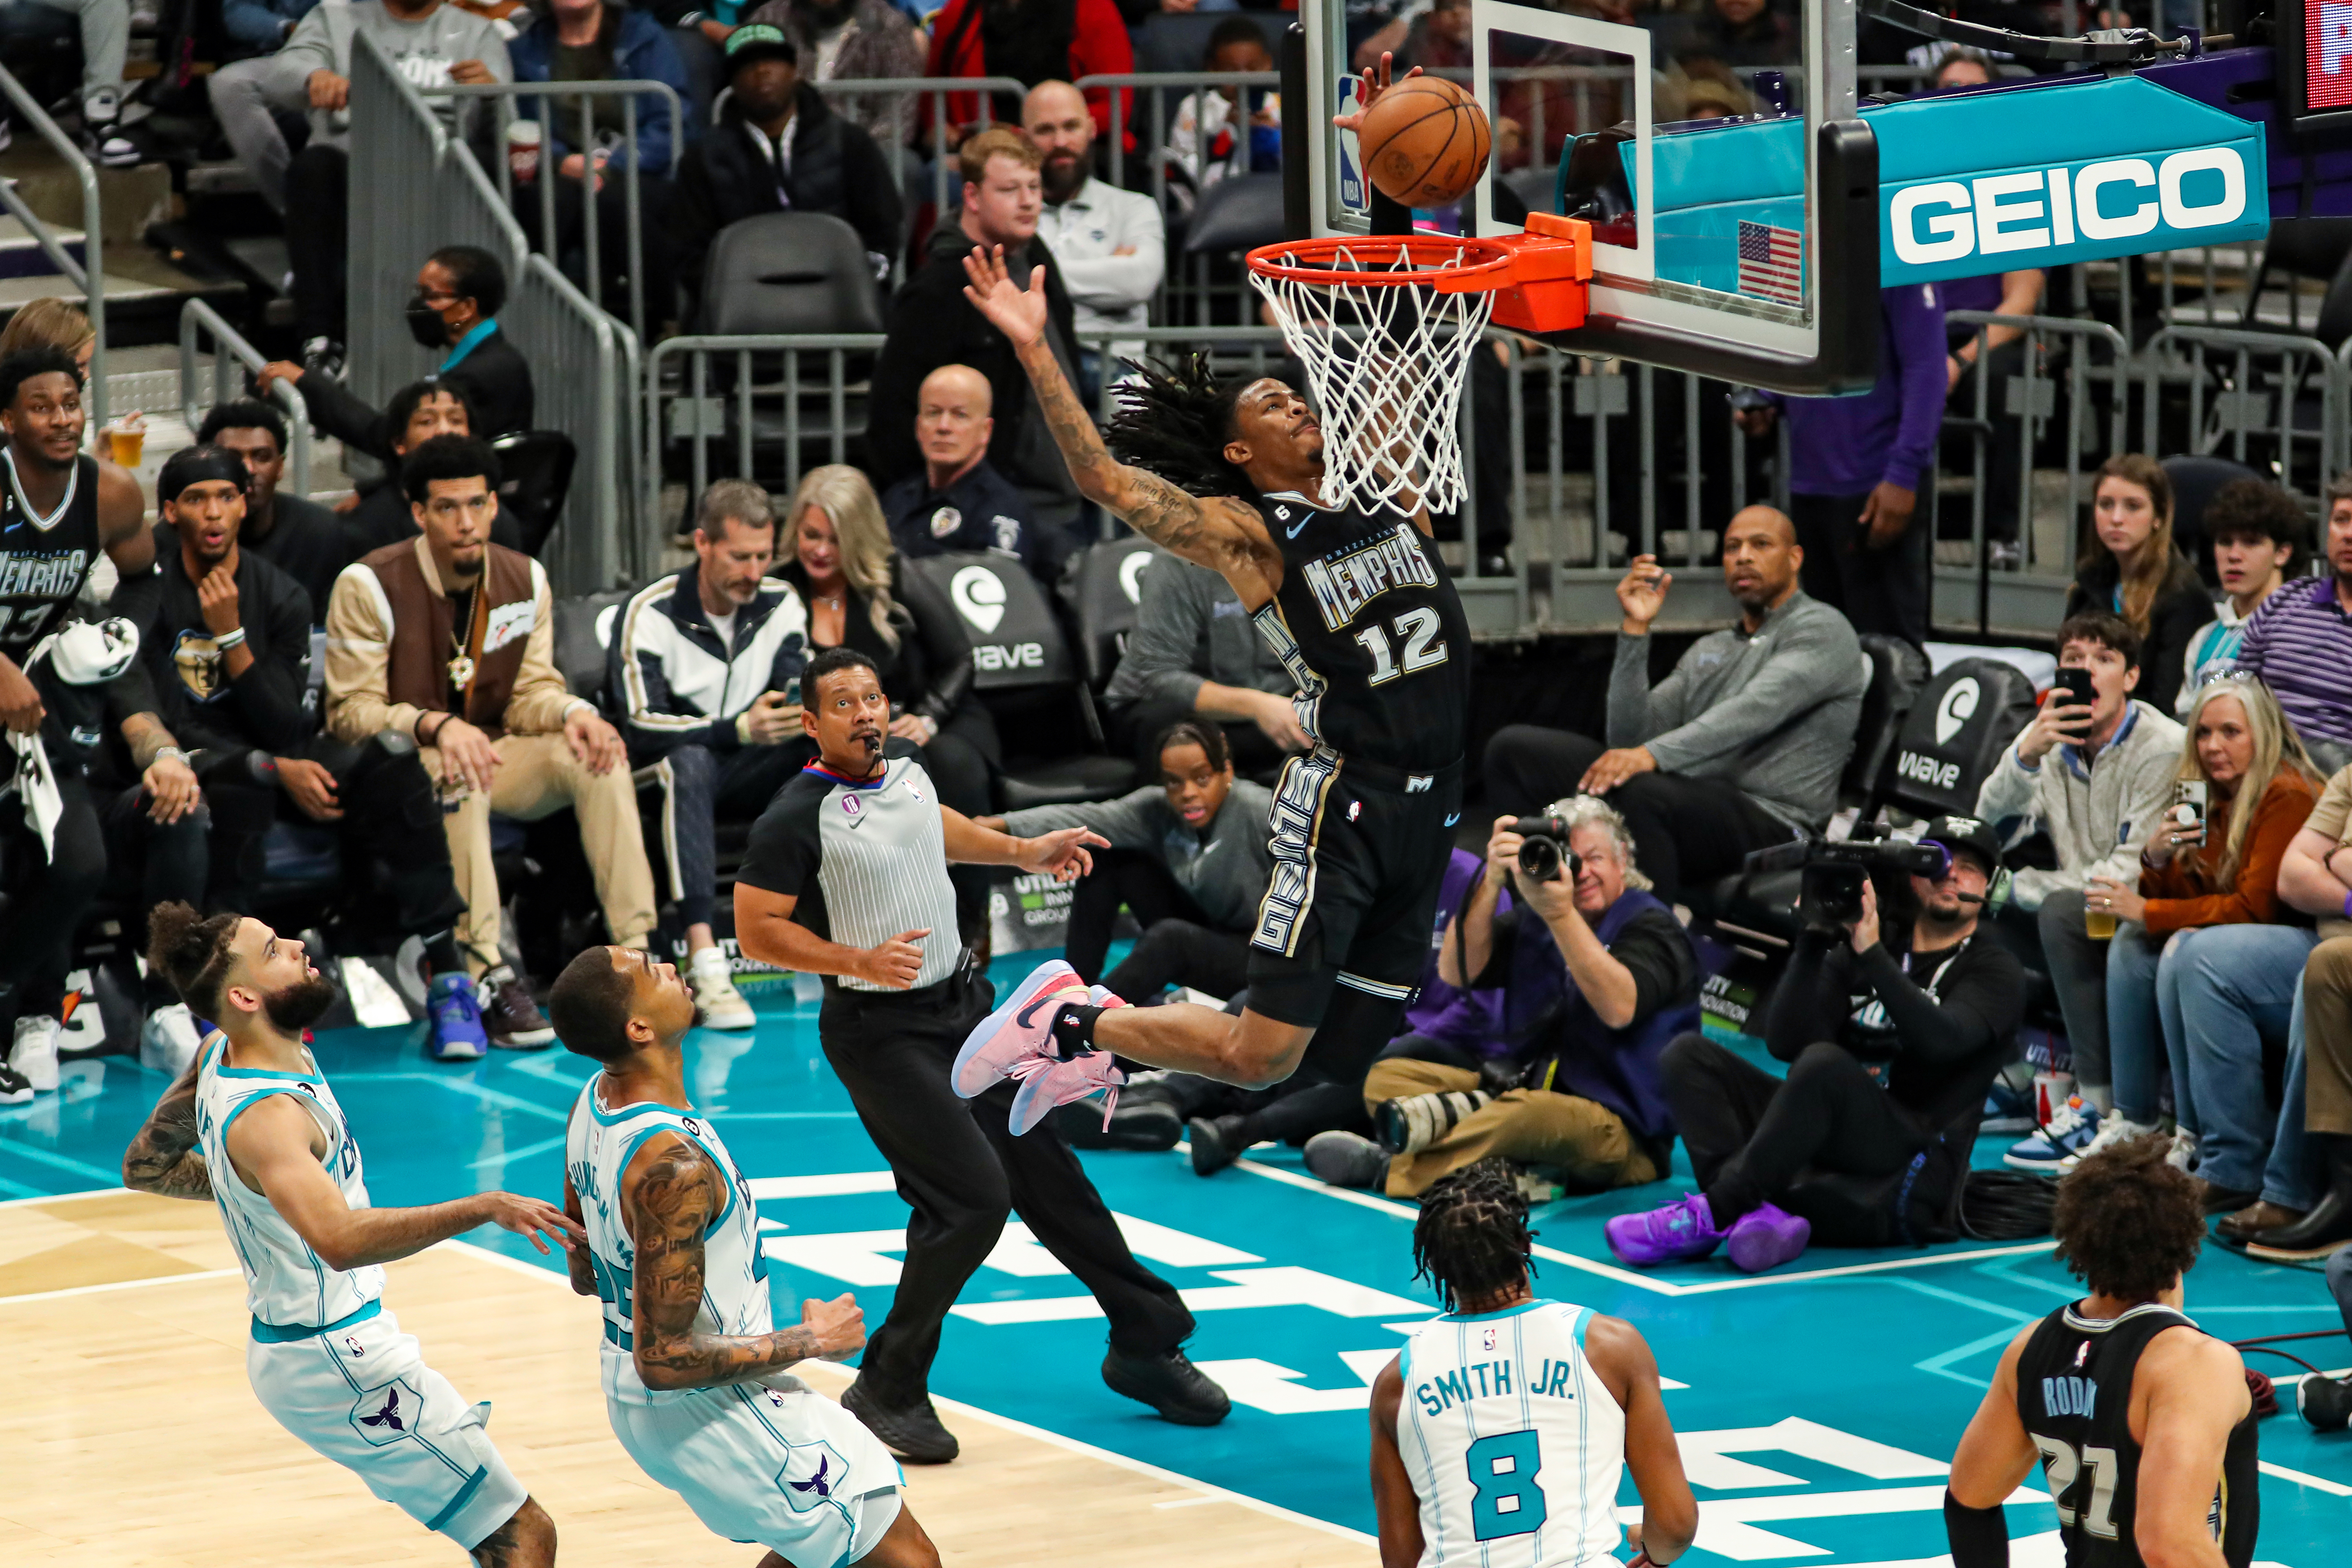 Ja Morant #12 of the Memphis Grizzlies drives to the basket during the game against the Charlotte Hornets on January 4, 2023 at Spectrum Center in Charlotte, North Carolina. (Photo by Brock Williams-Smith/NBAE via Getty Images)